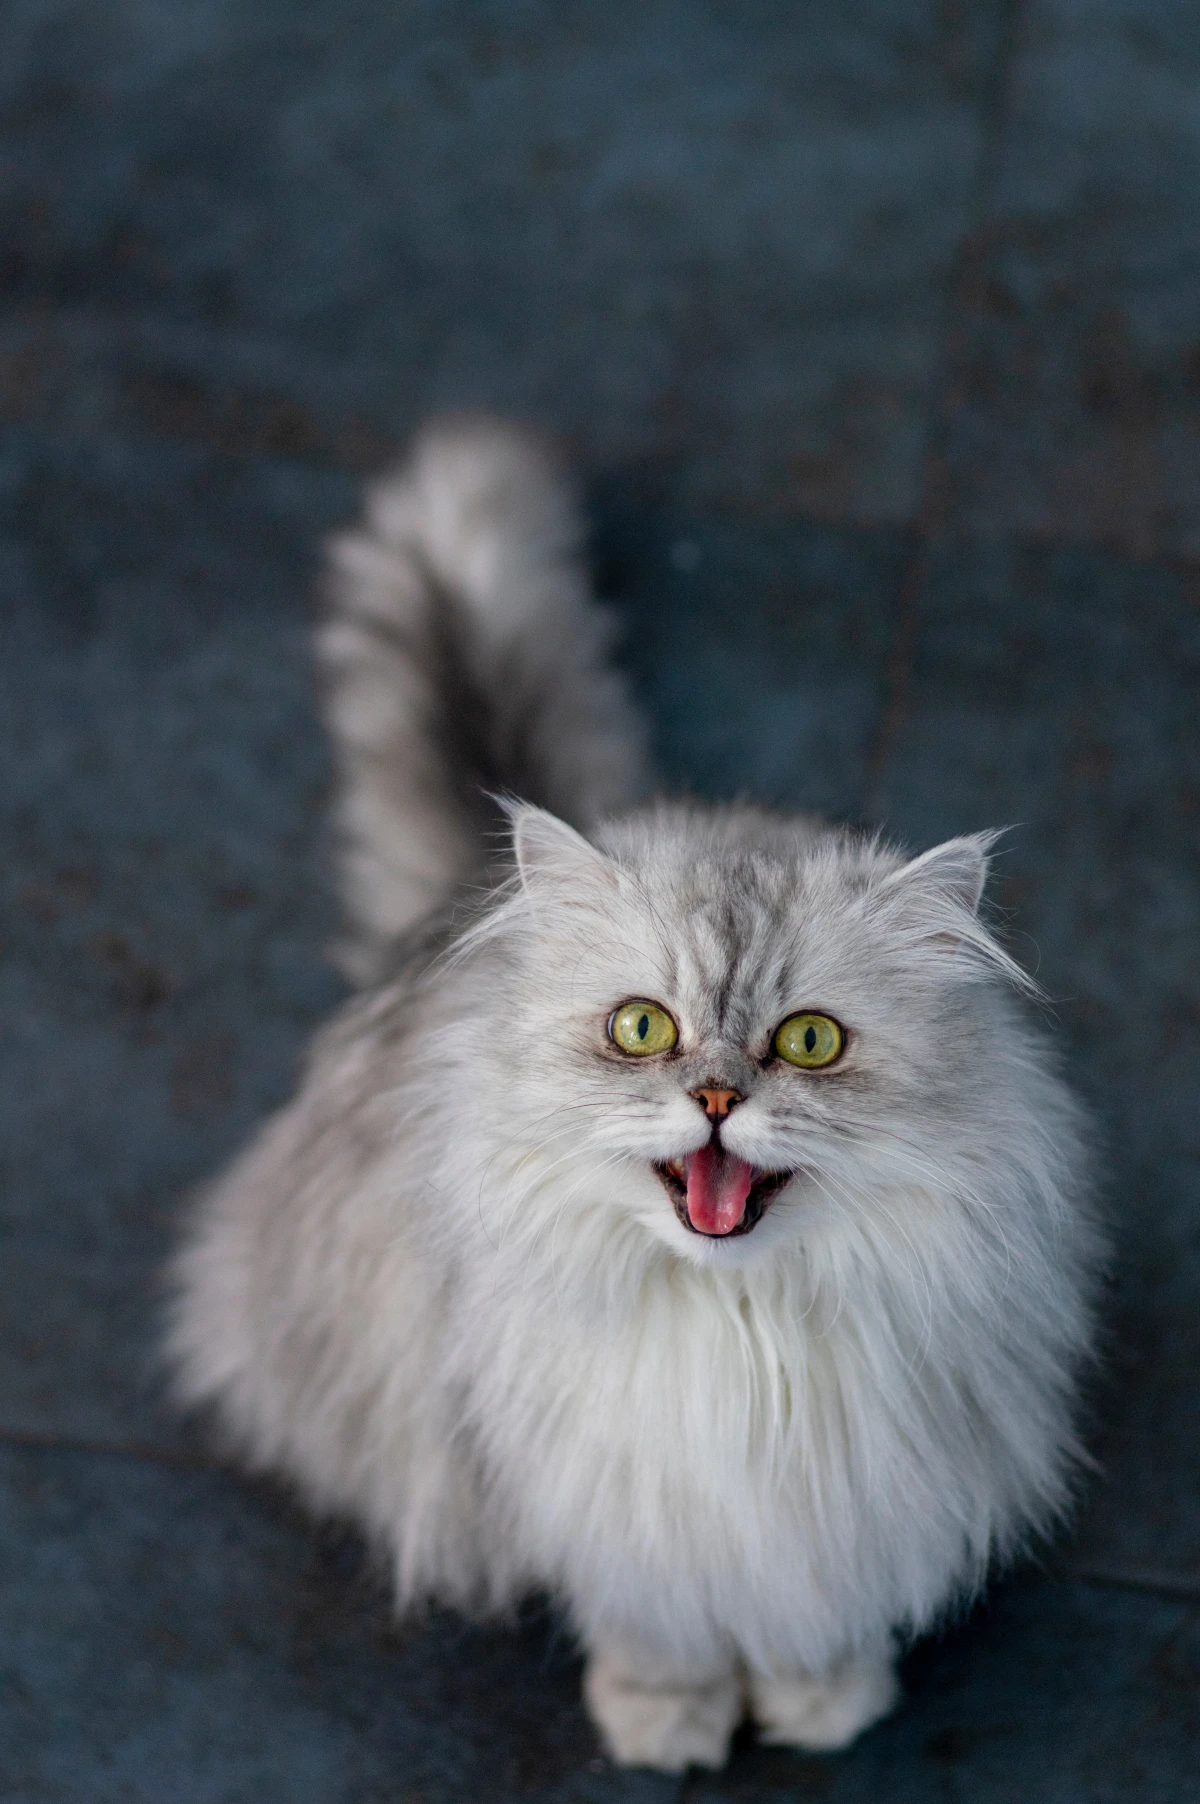 affectionate cat breed persian cat with green eyes